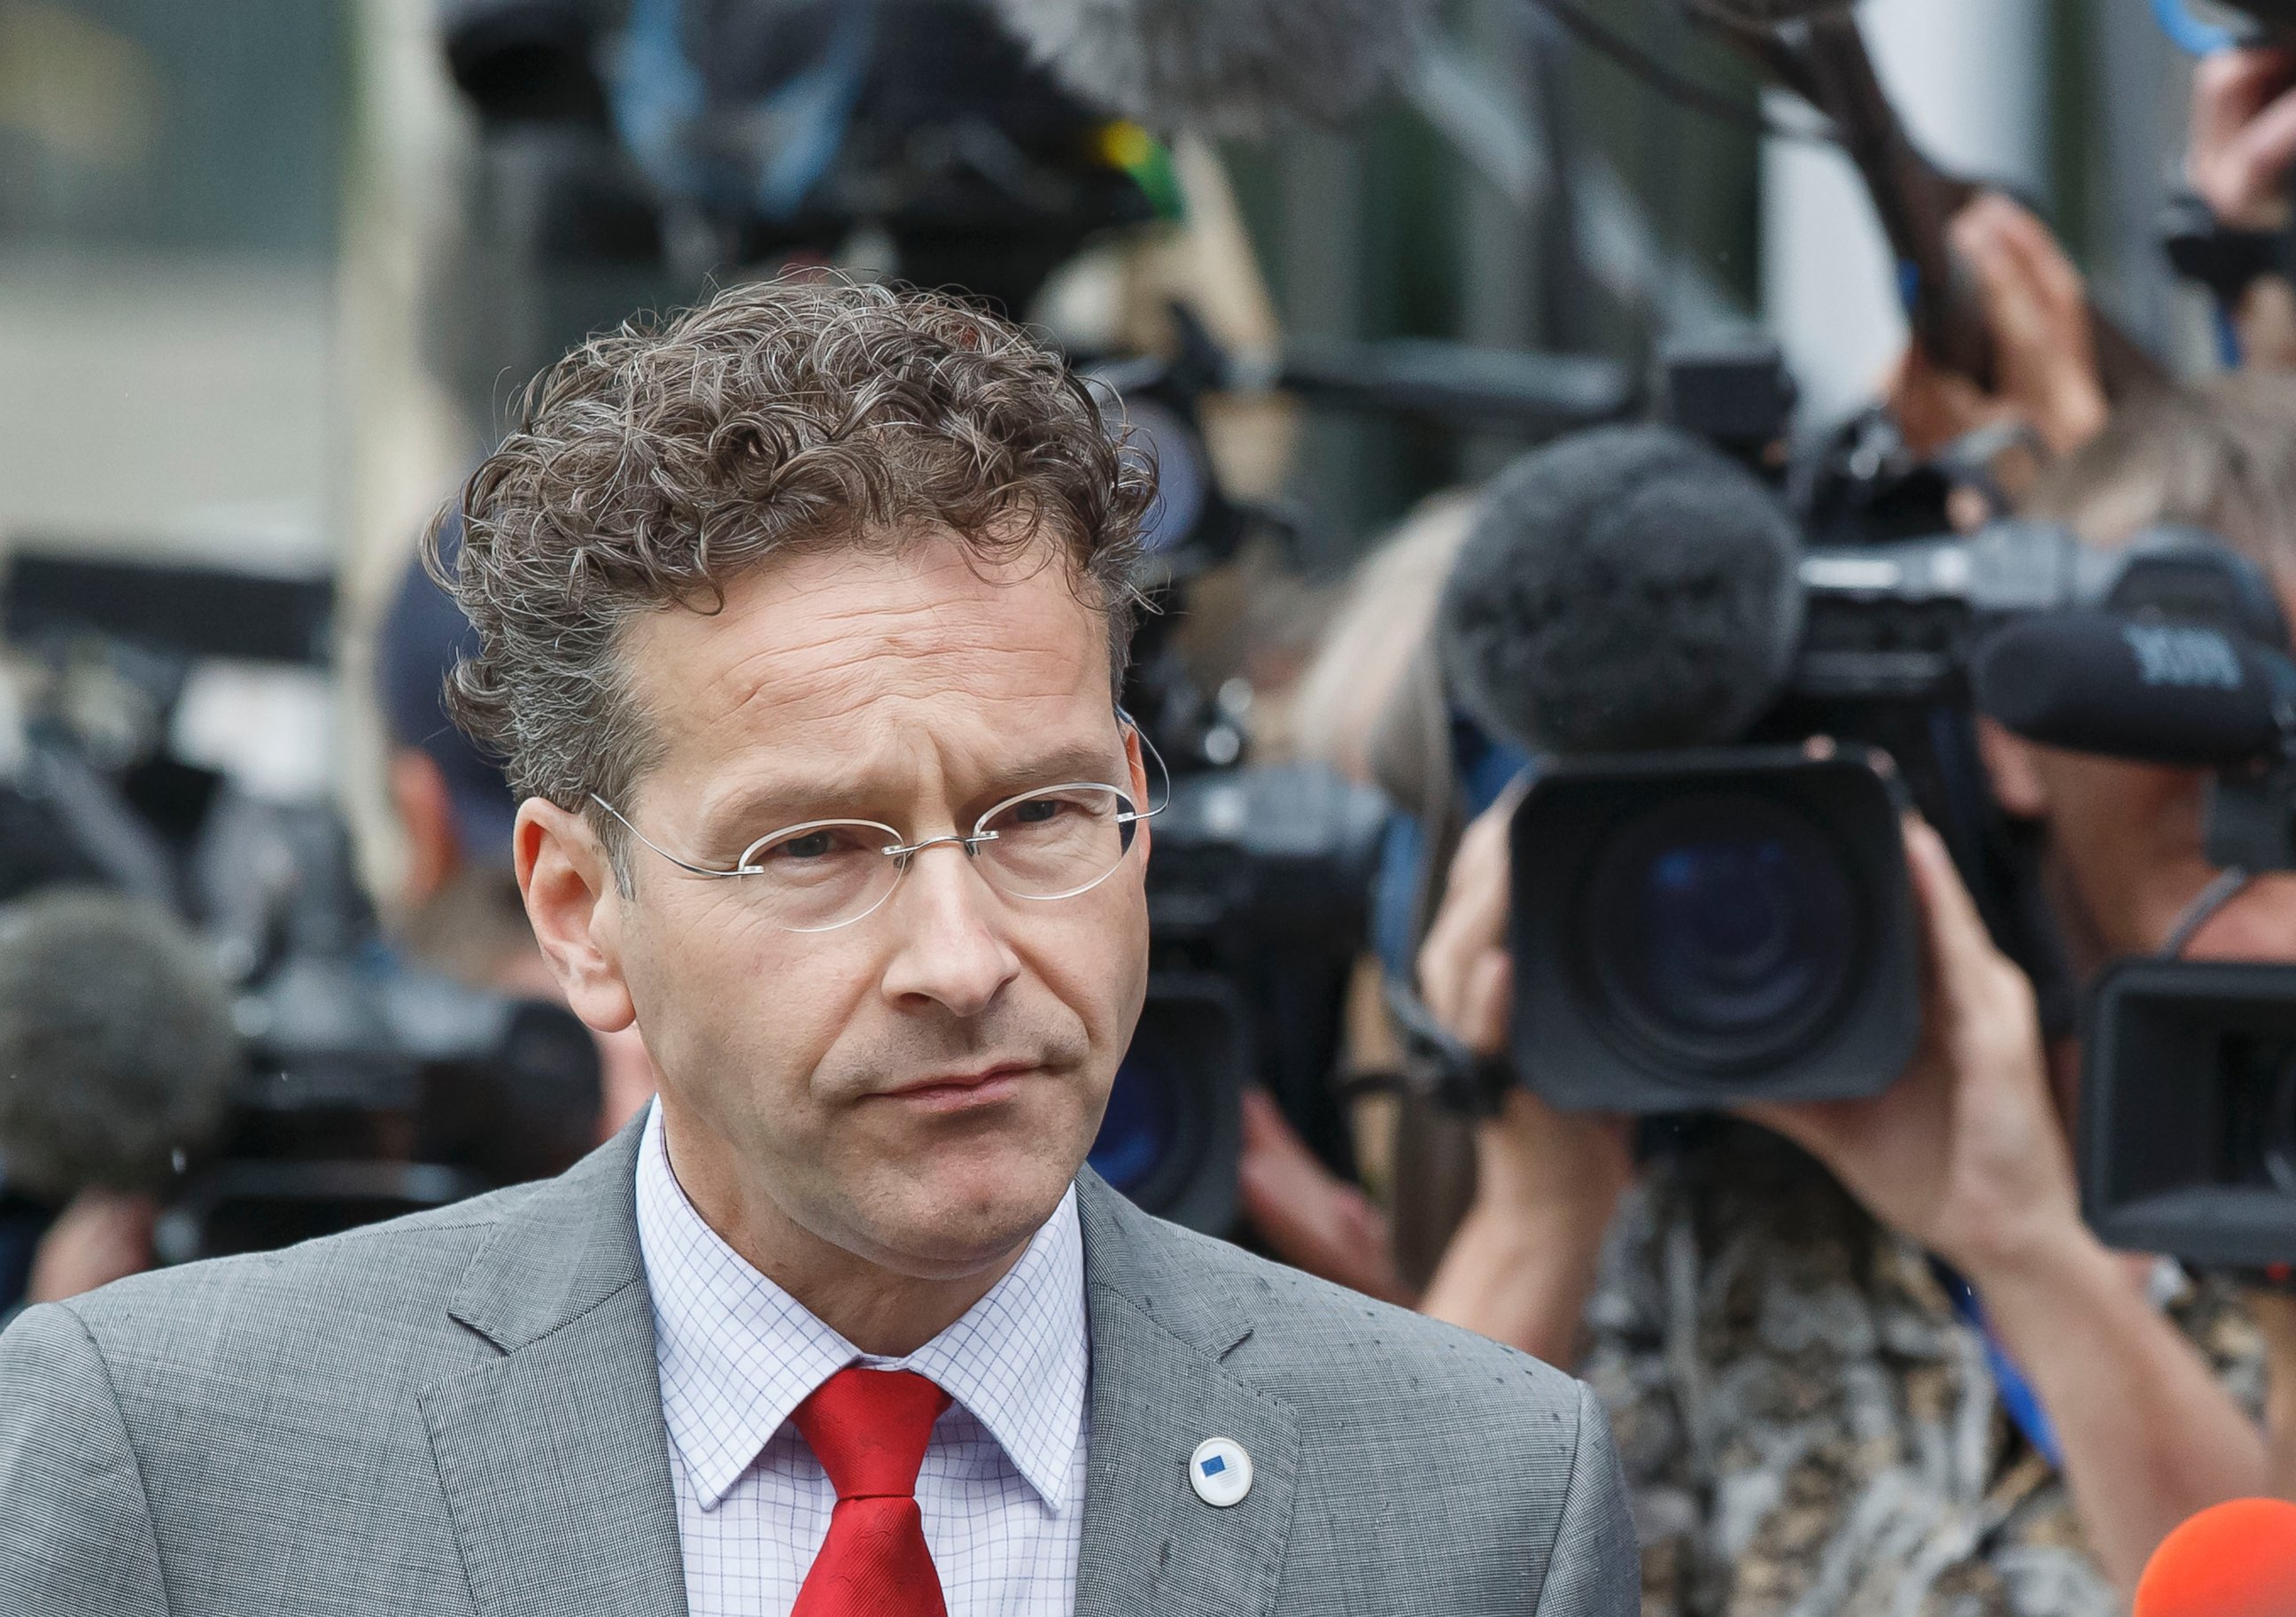 PHOTO: Dutch Finance Minister and chair of the eurogroup Jeroen Dijsselbloem, walks past the media after a meeting of eurozone finance ministers at the EU LEX building in Brussels, July 7, 2015.